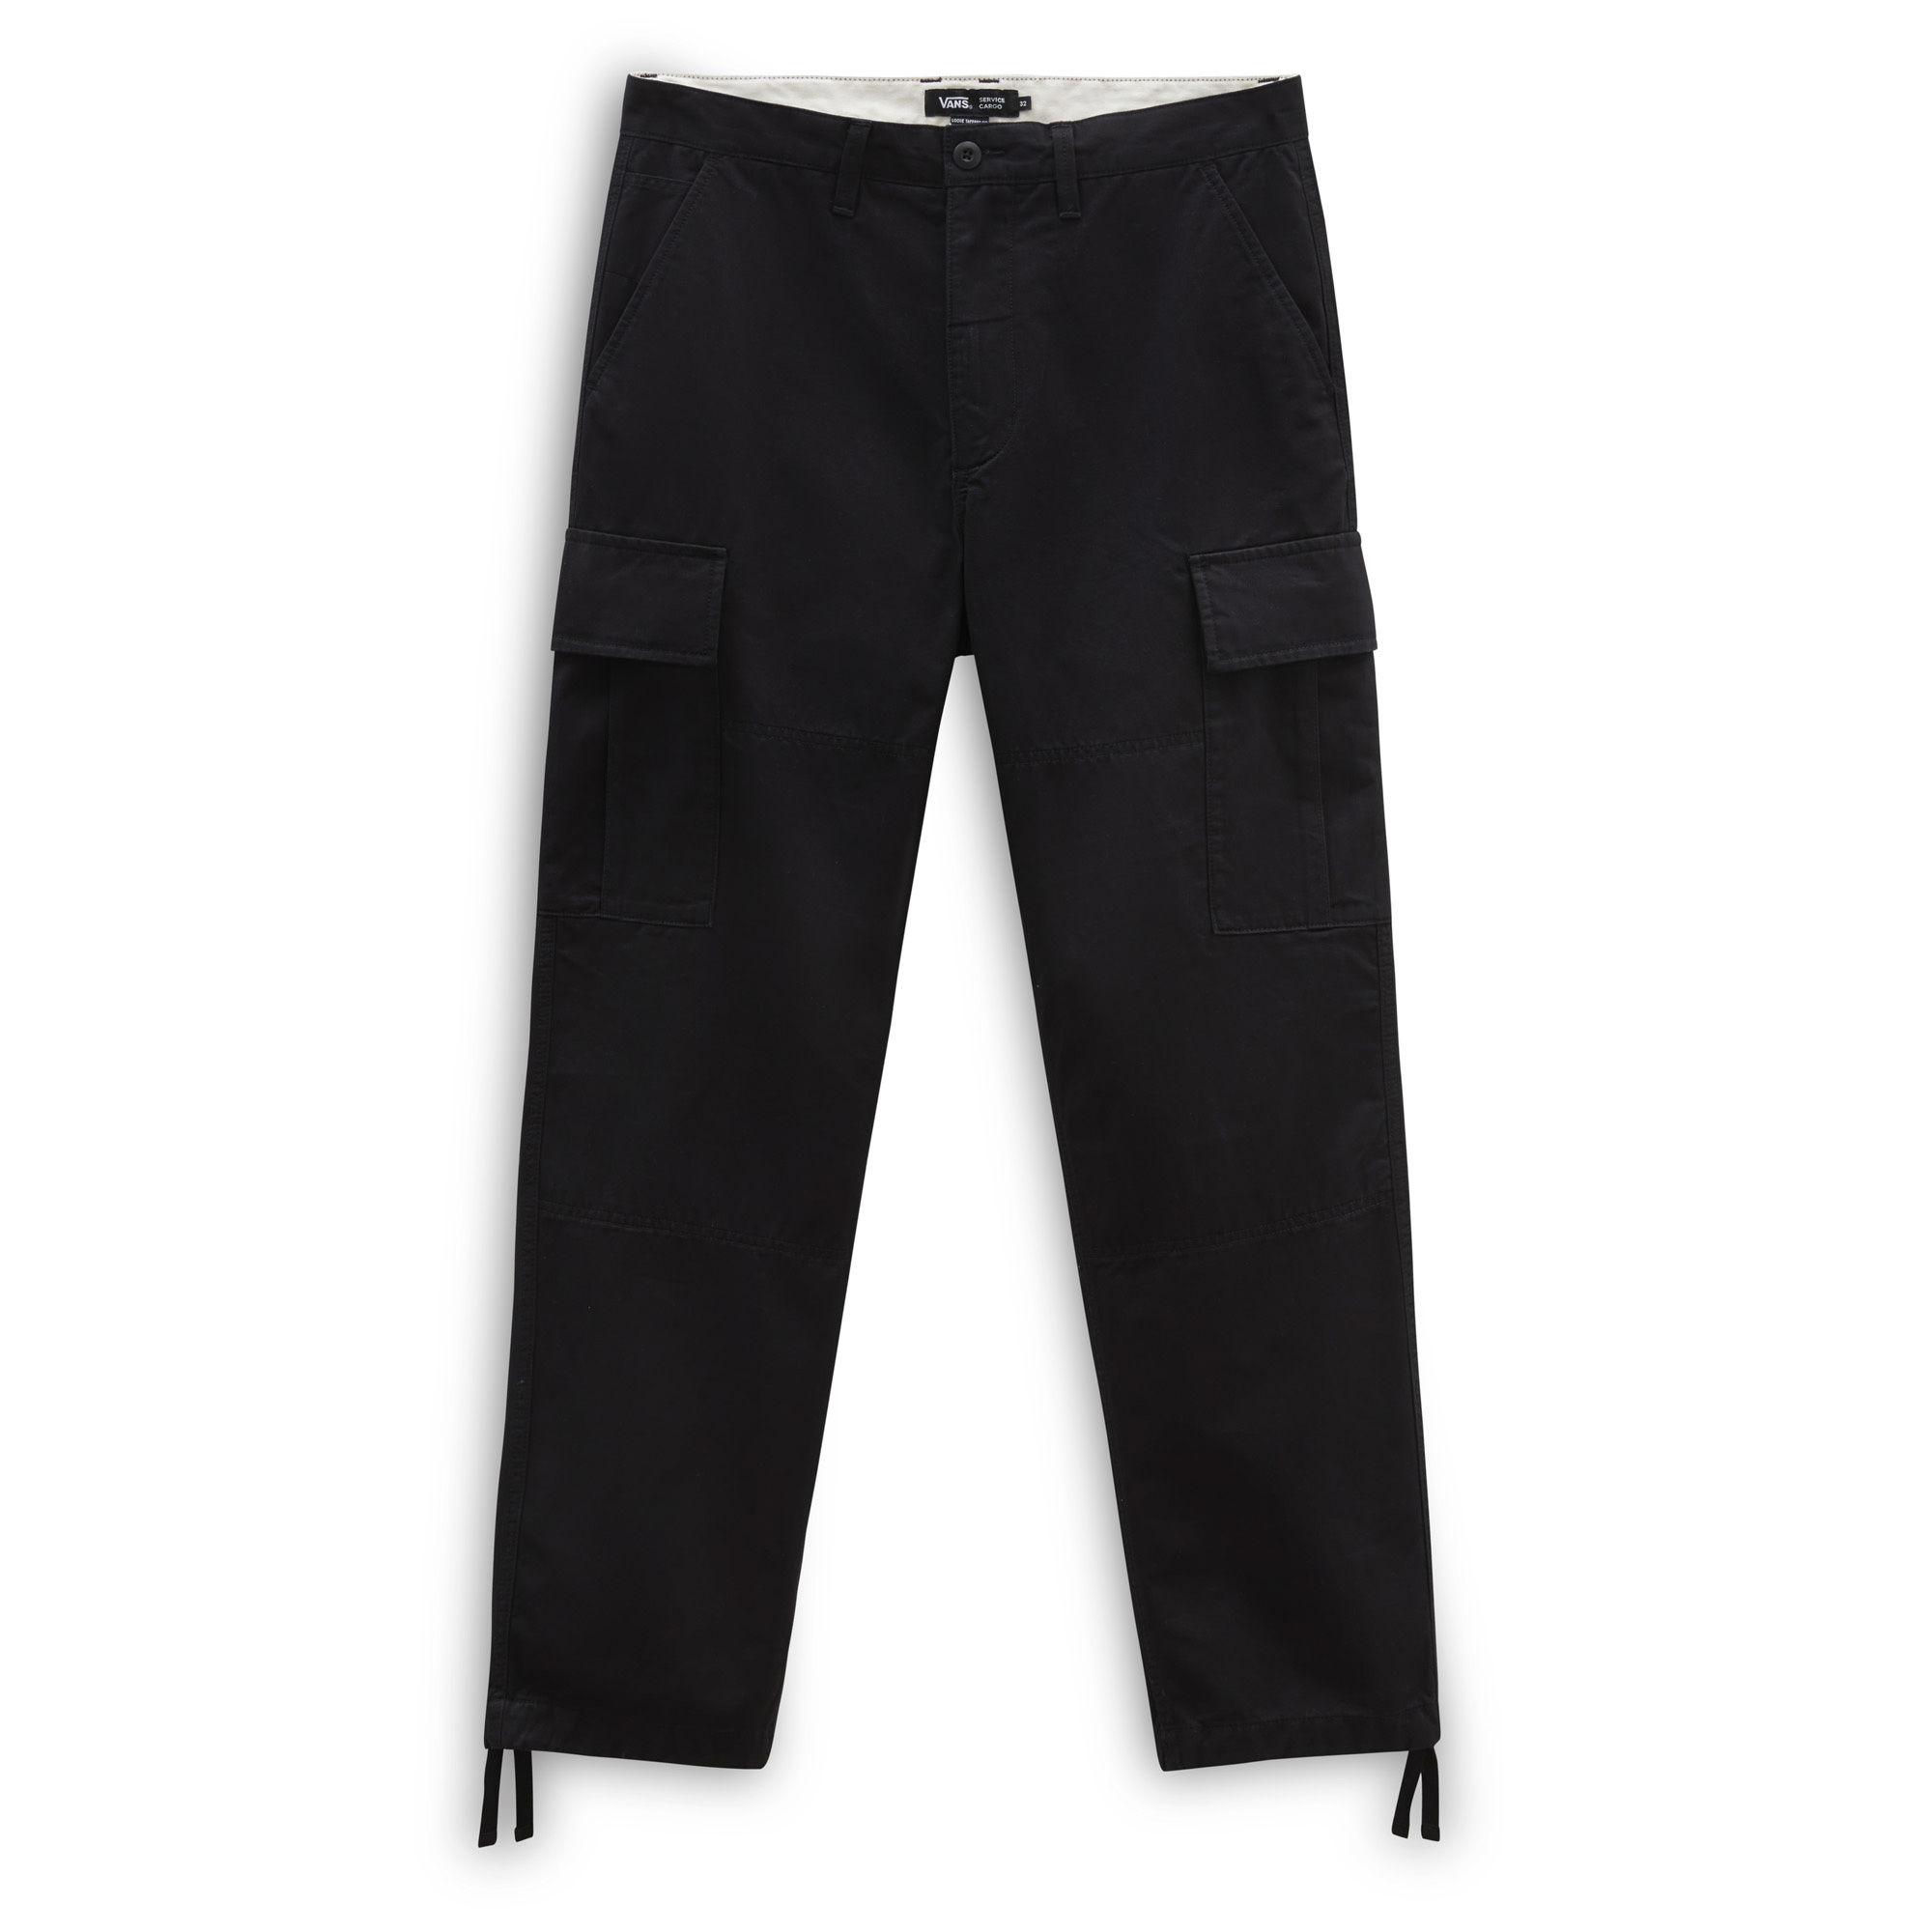 SERVICE CARGO LOOSE TAPERED TROUSERS